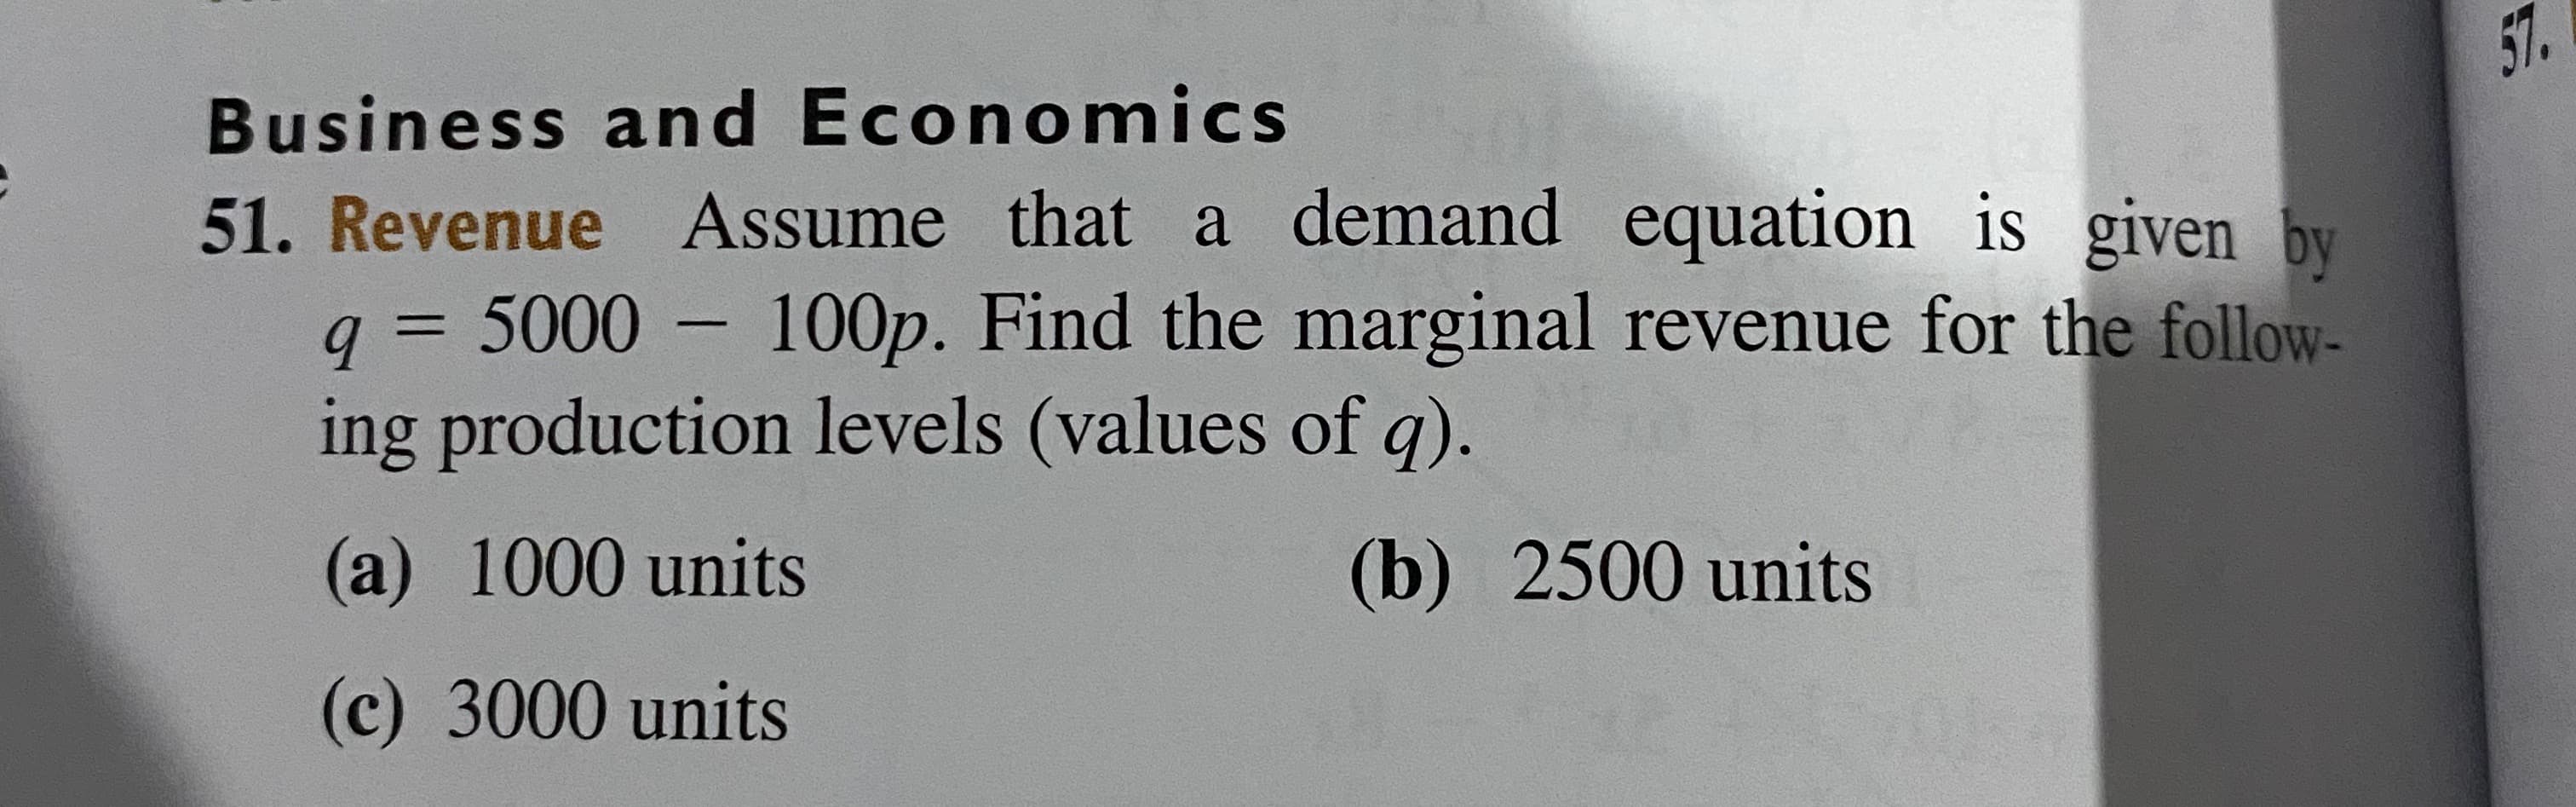 Business and Economics
57.
51. Revenue Assume that a demand equation is given by
q = 5000 – 100p. Find the marginal revenue for the follow-
ing production levels (values of q).
%3D
(a) 1000 units
(b) 2500 units
(c) 3000 units
